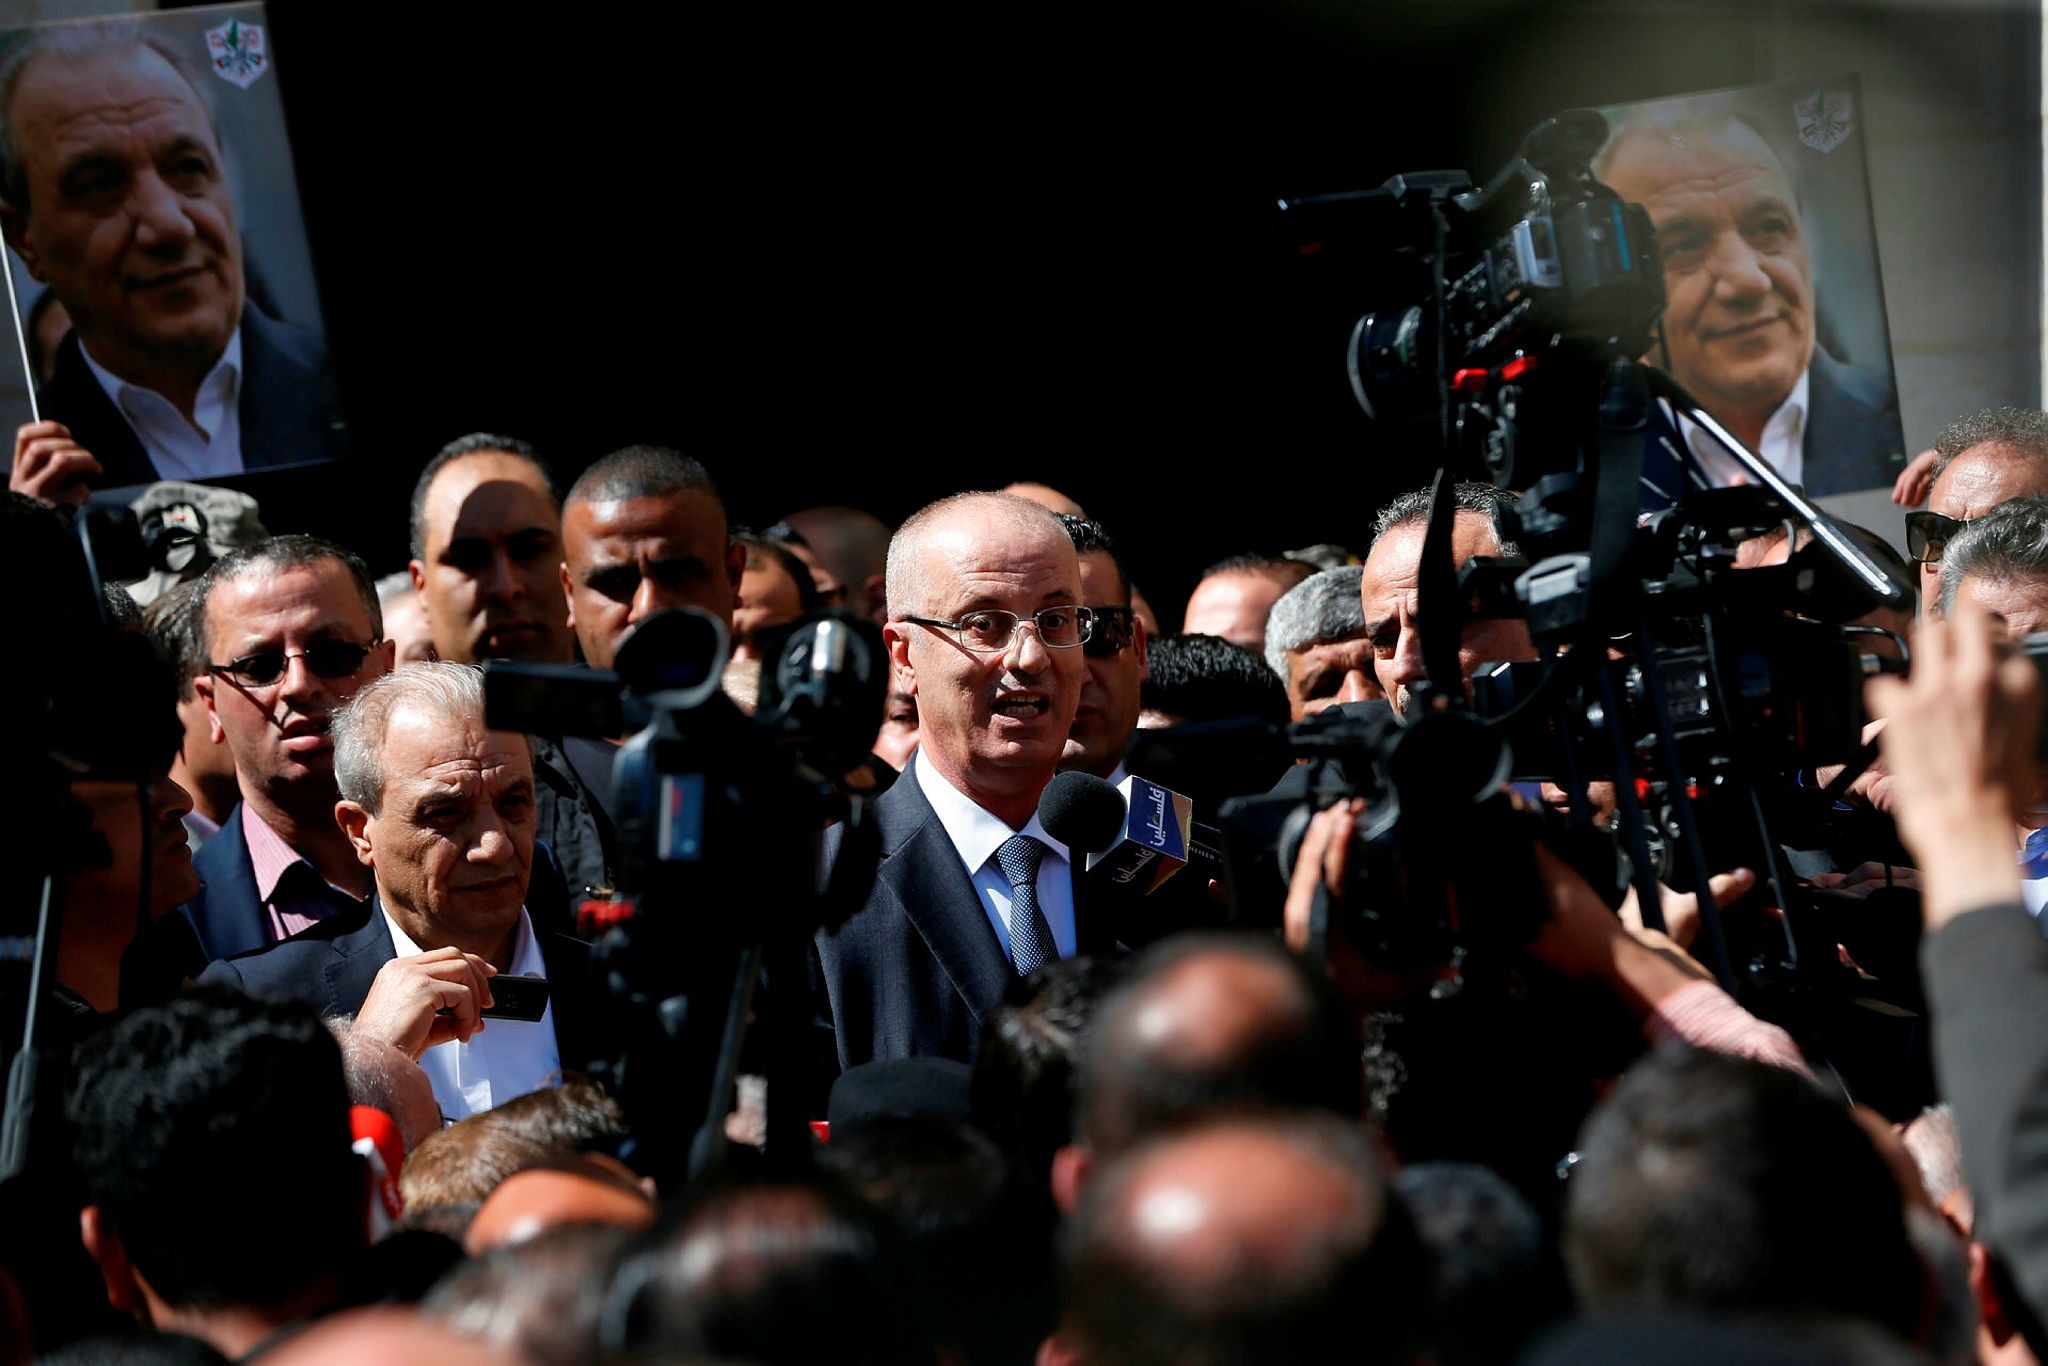 Palestinian Prime Minister Rami Hamdallah (C) addresses the media upon his arrival in the West Bank town of Ramallah following his return from the Gaza Strip where an explosion targeted his convoy, March 13.